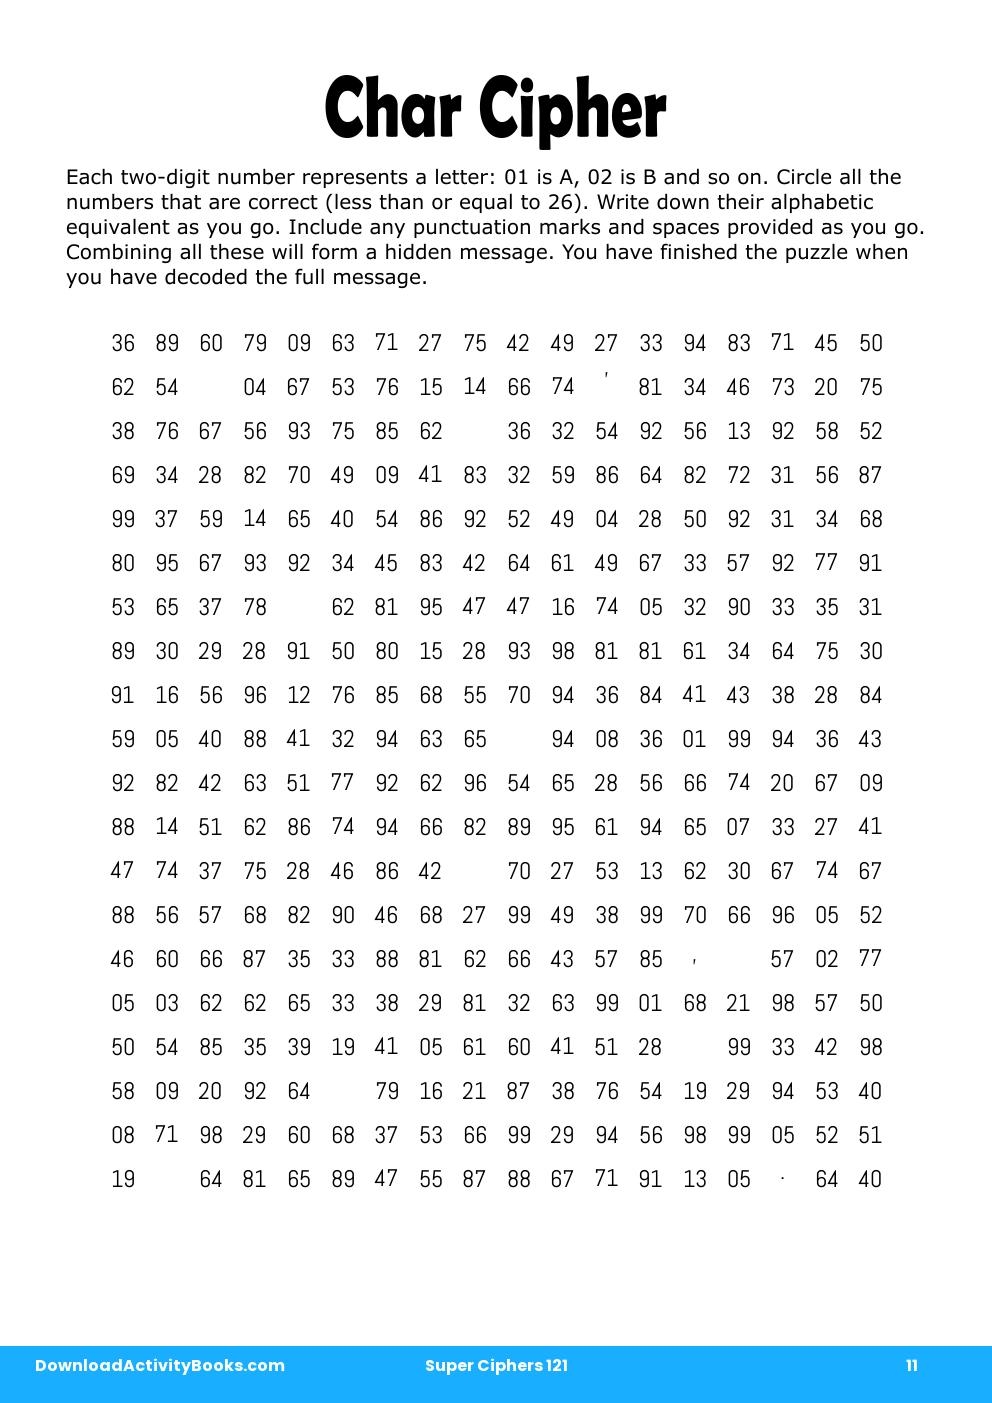 Char Cipher in Super Ciphers 121